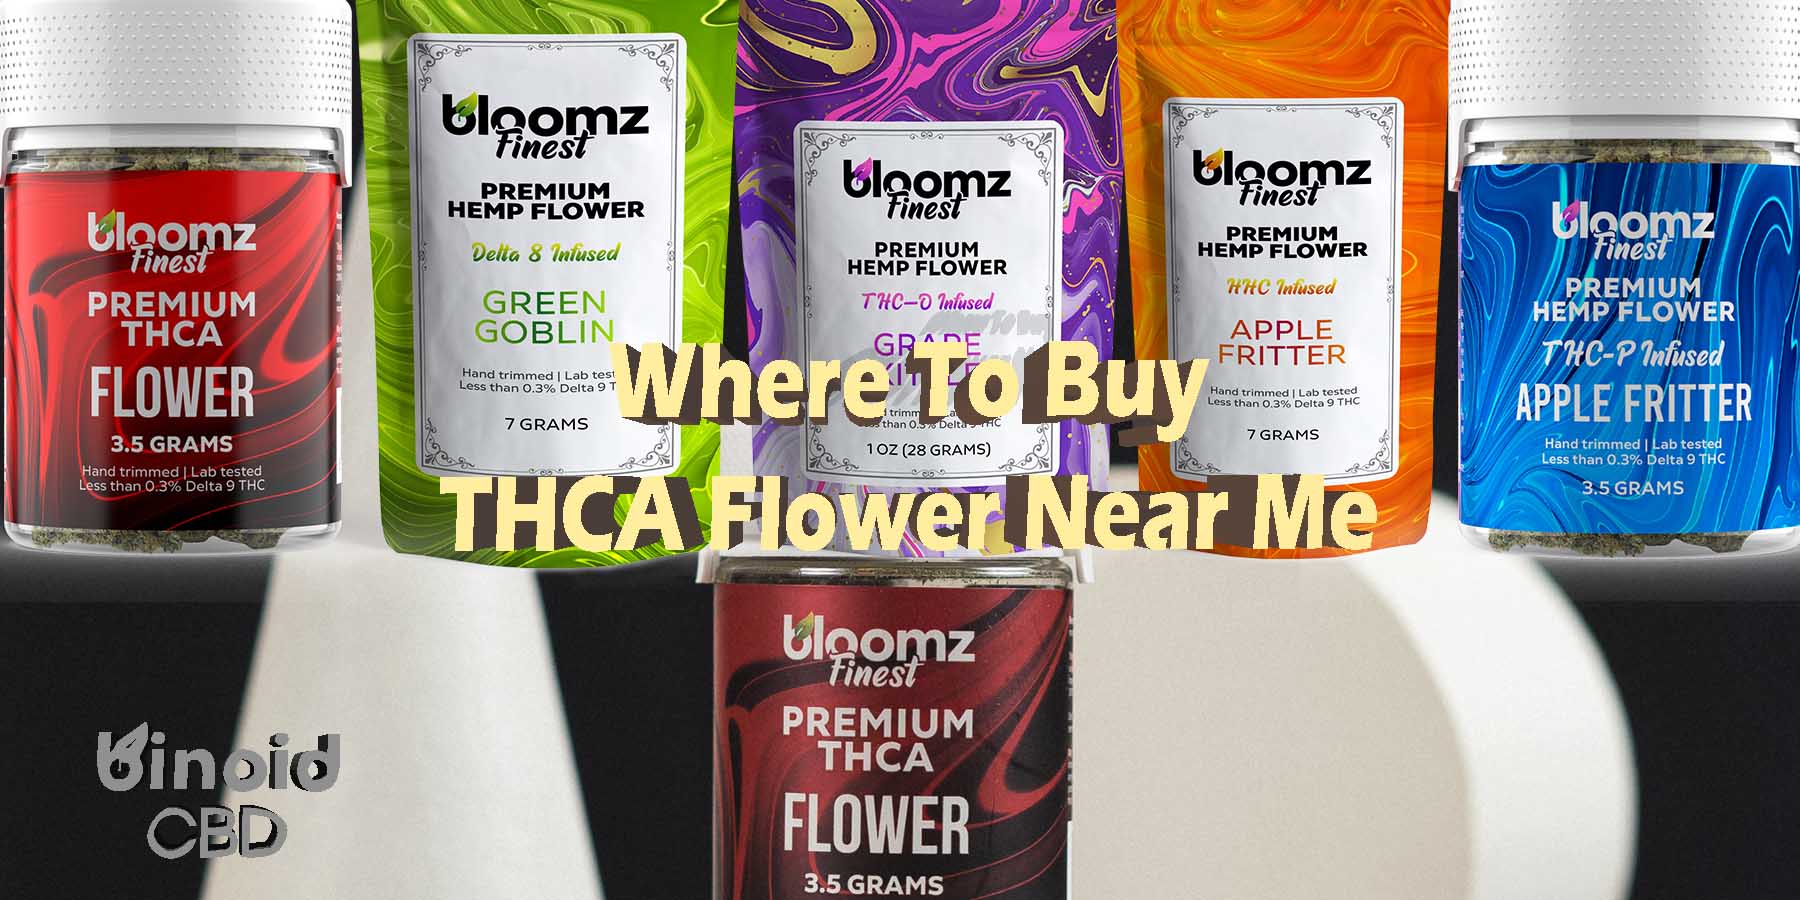 Where To Buy THCA Flower Near Me Where And How To Buy THCA Flower By The Pound Made Pre Rolls Where To Get Near Me Best Place Lowest Price Coupon Discount Strongest Brand Bloomz.